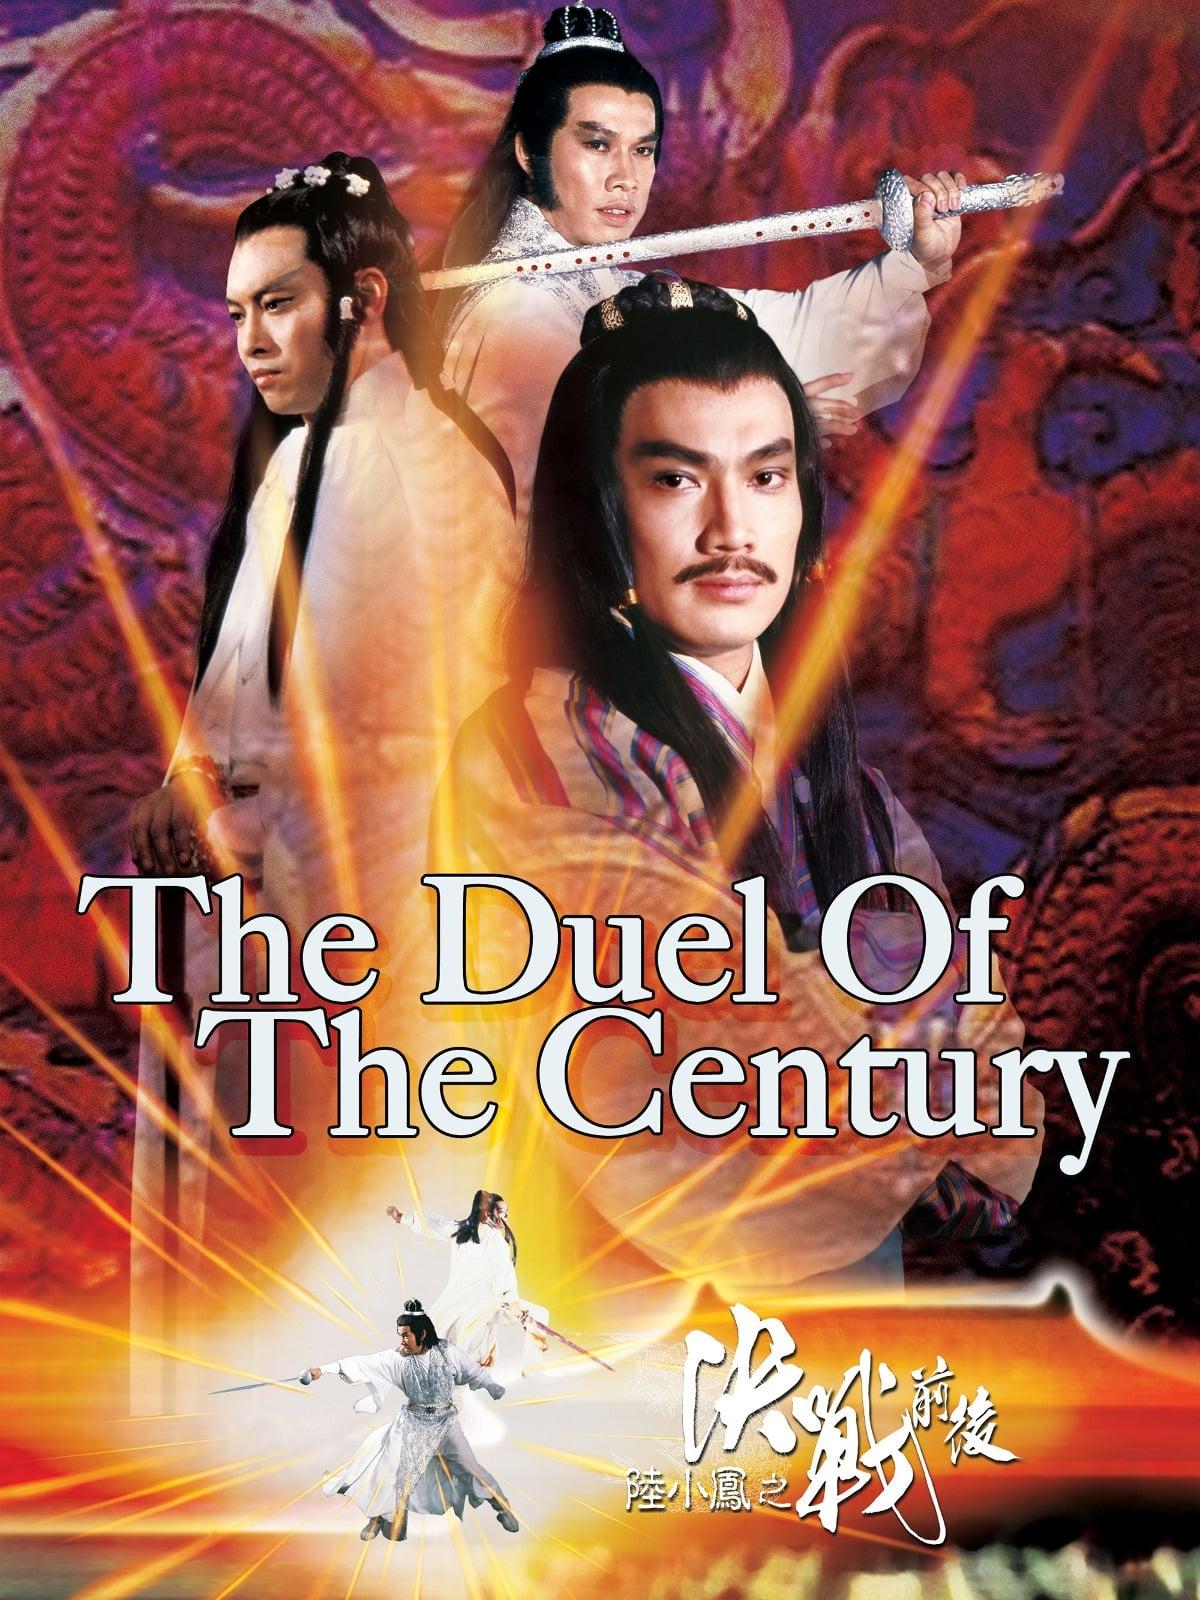 The Duel of the Century poster